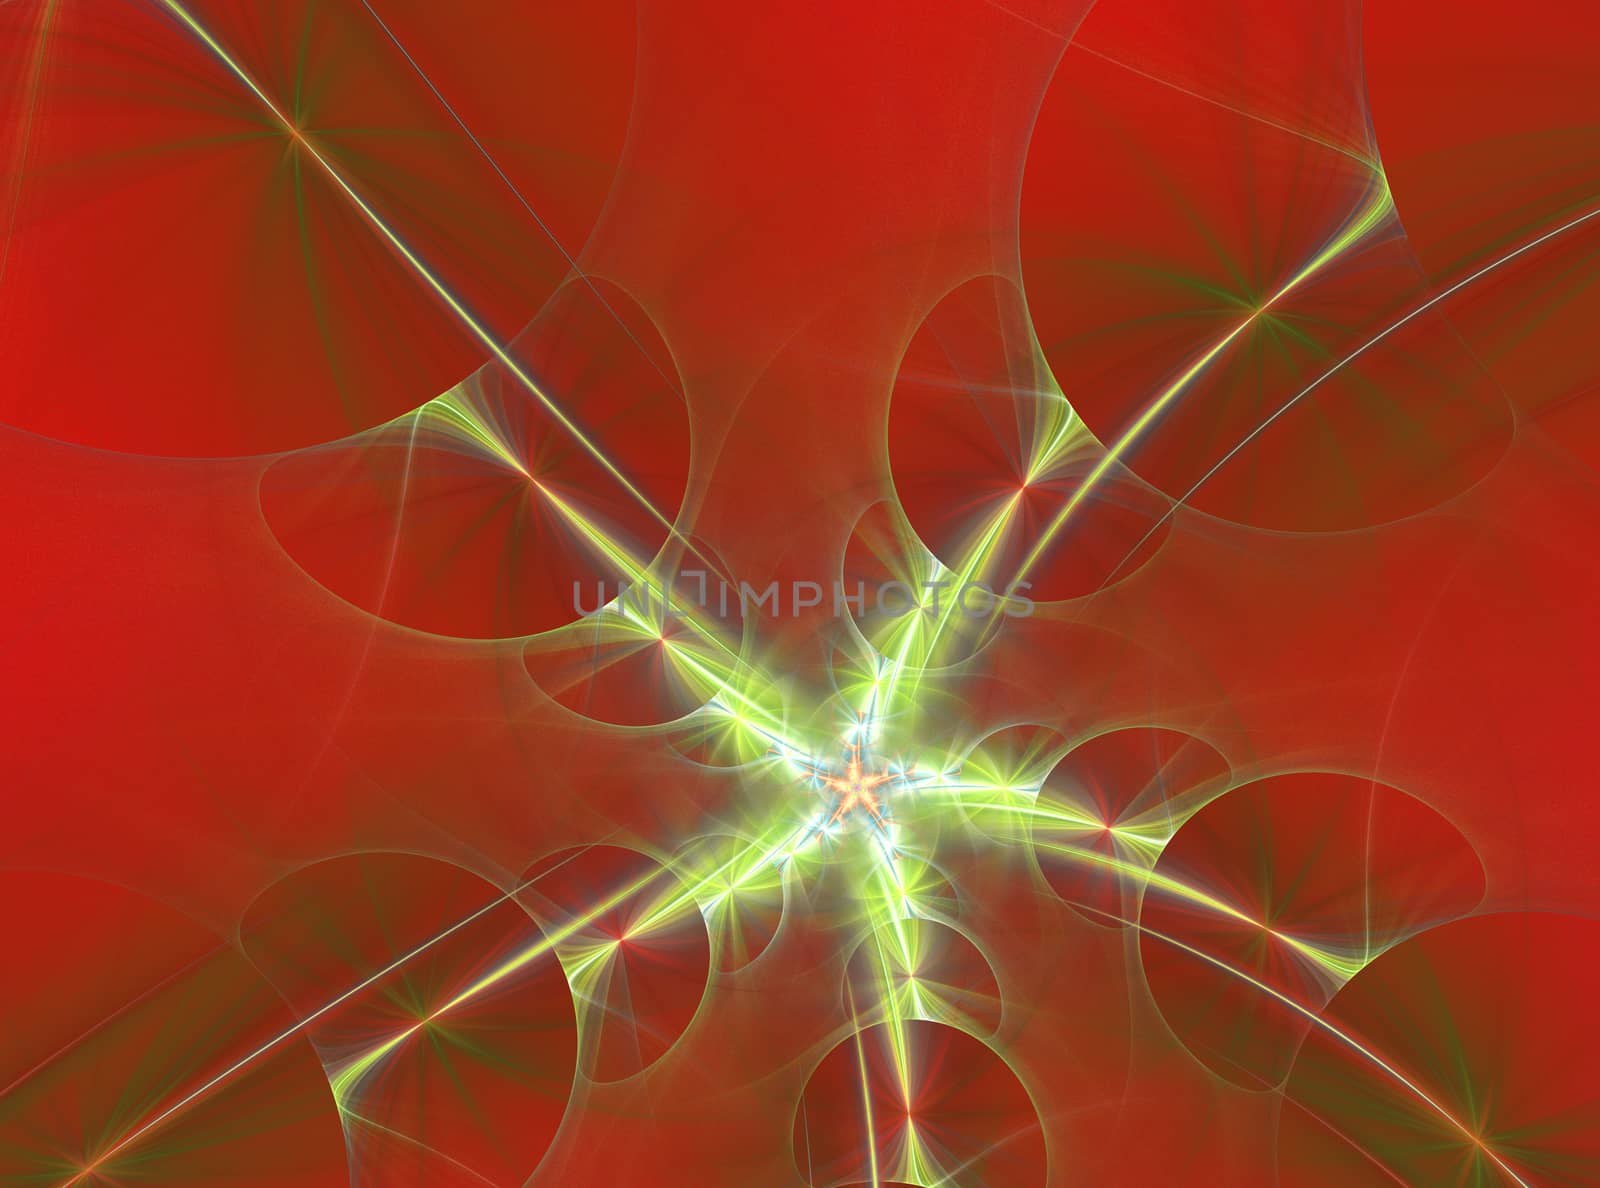 abstract fractal pattern on red background by Chechotkin